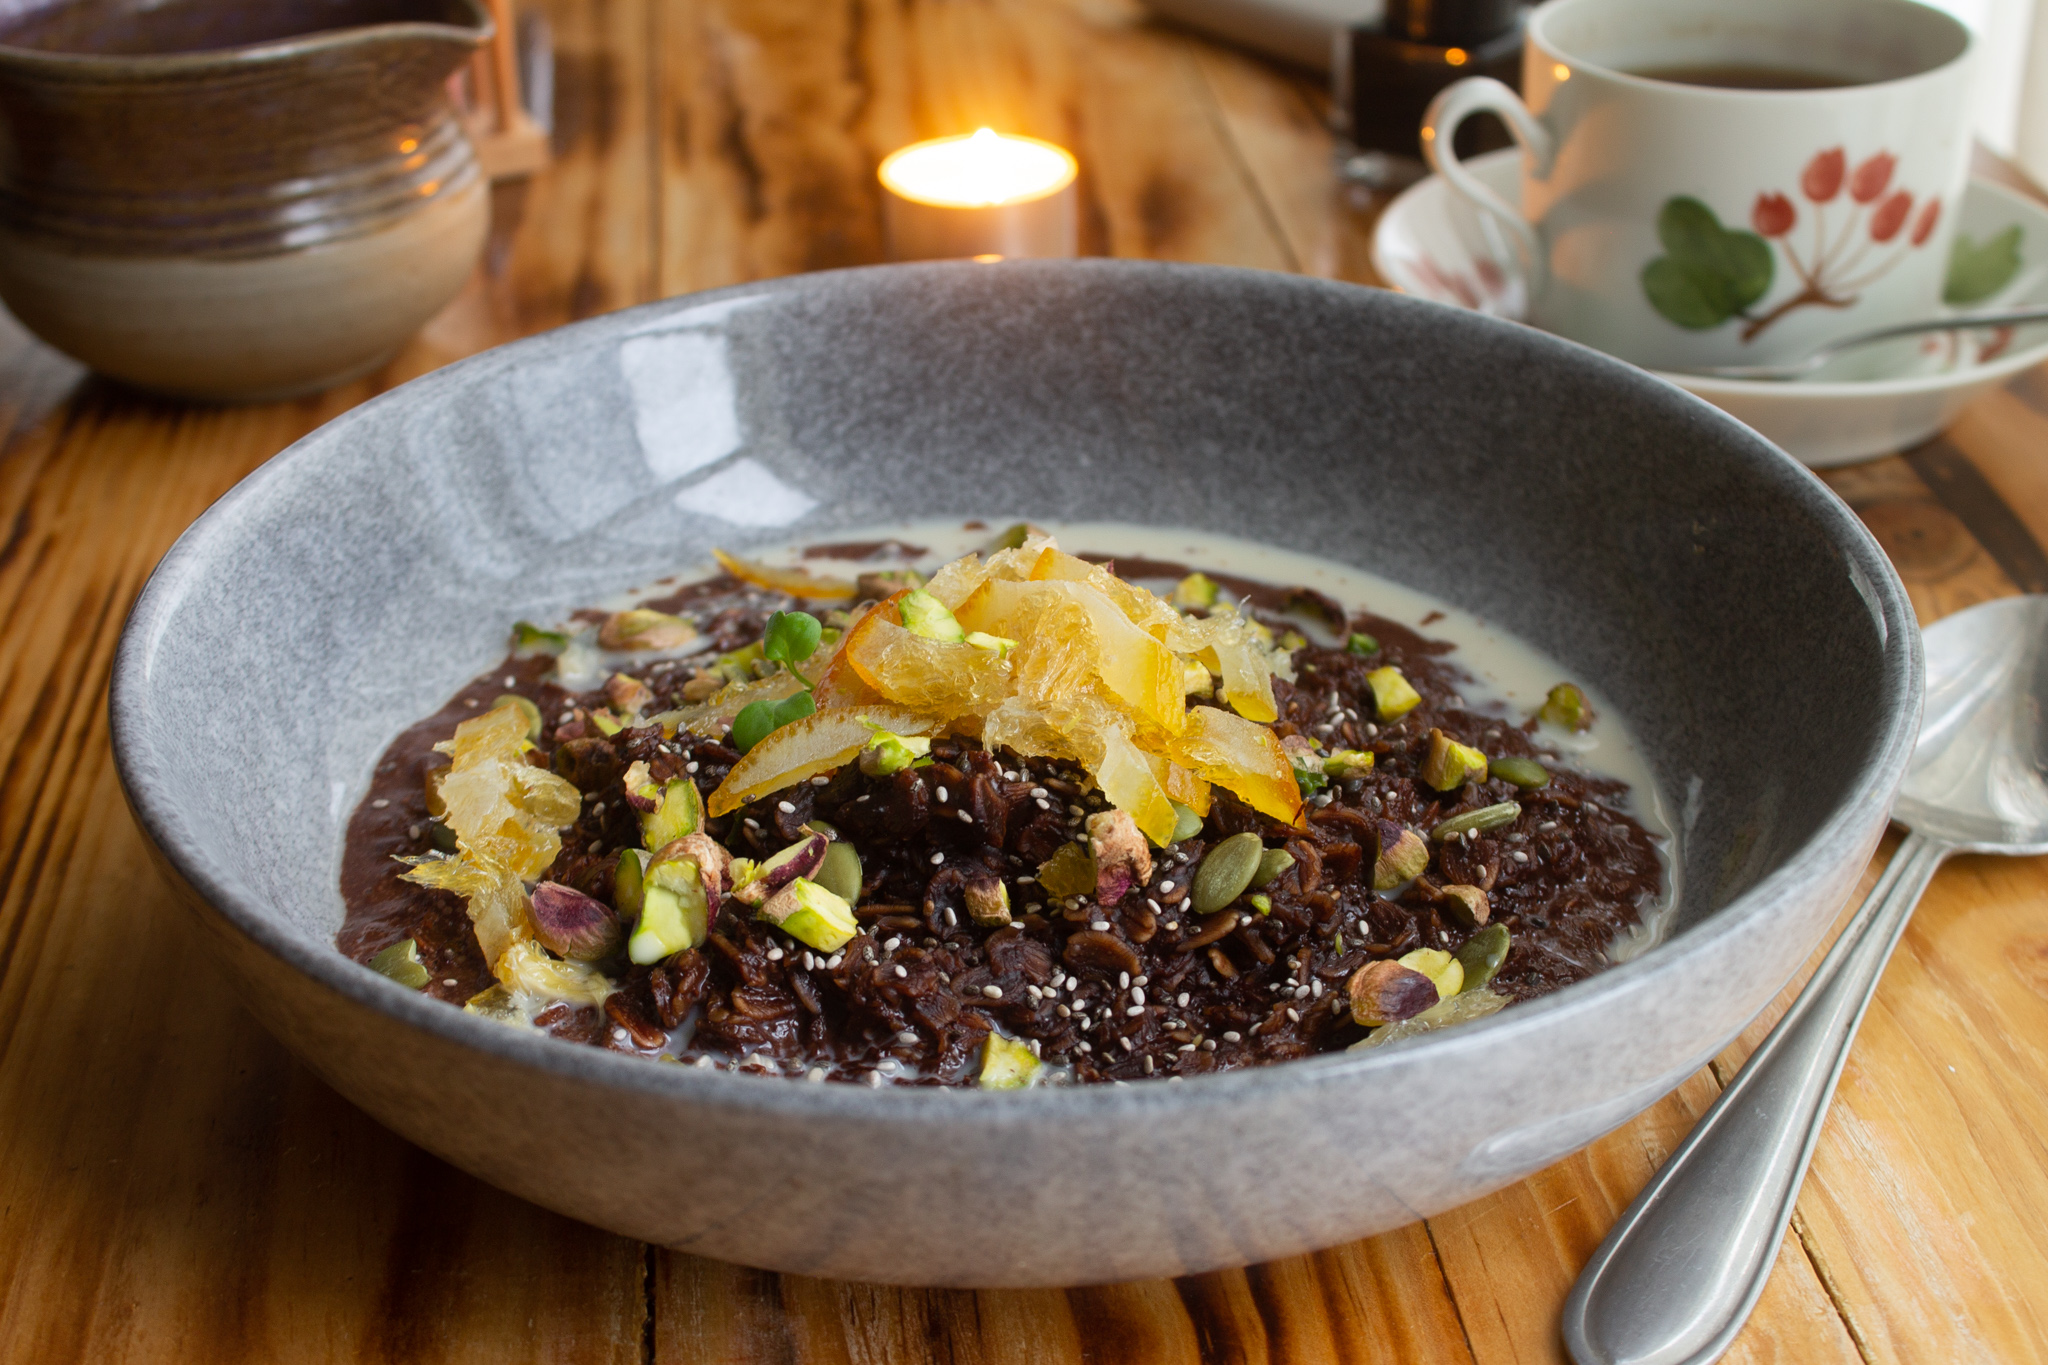 Cocoa oats with candied orange and pistachio